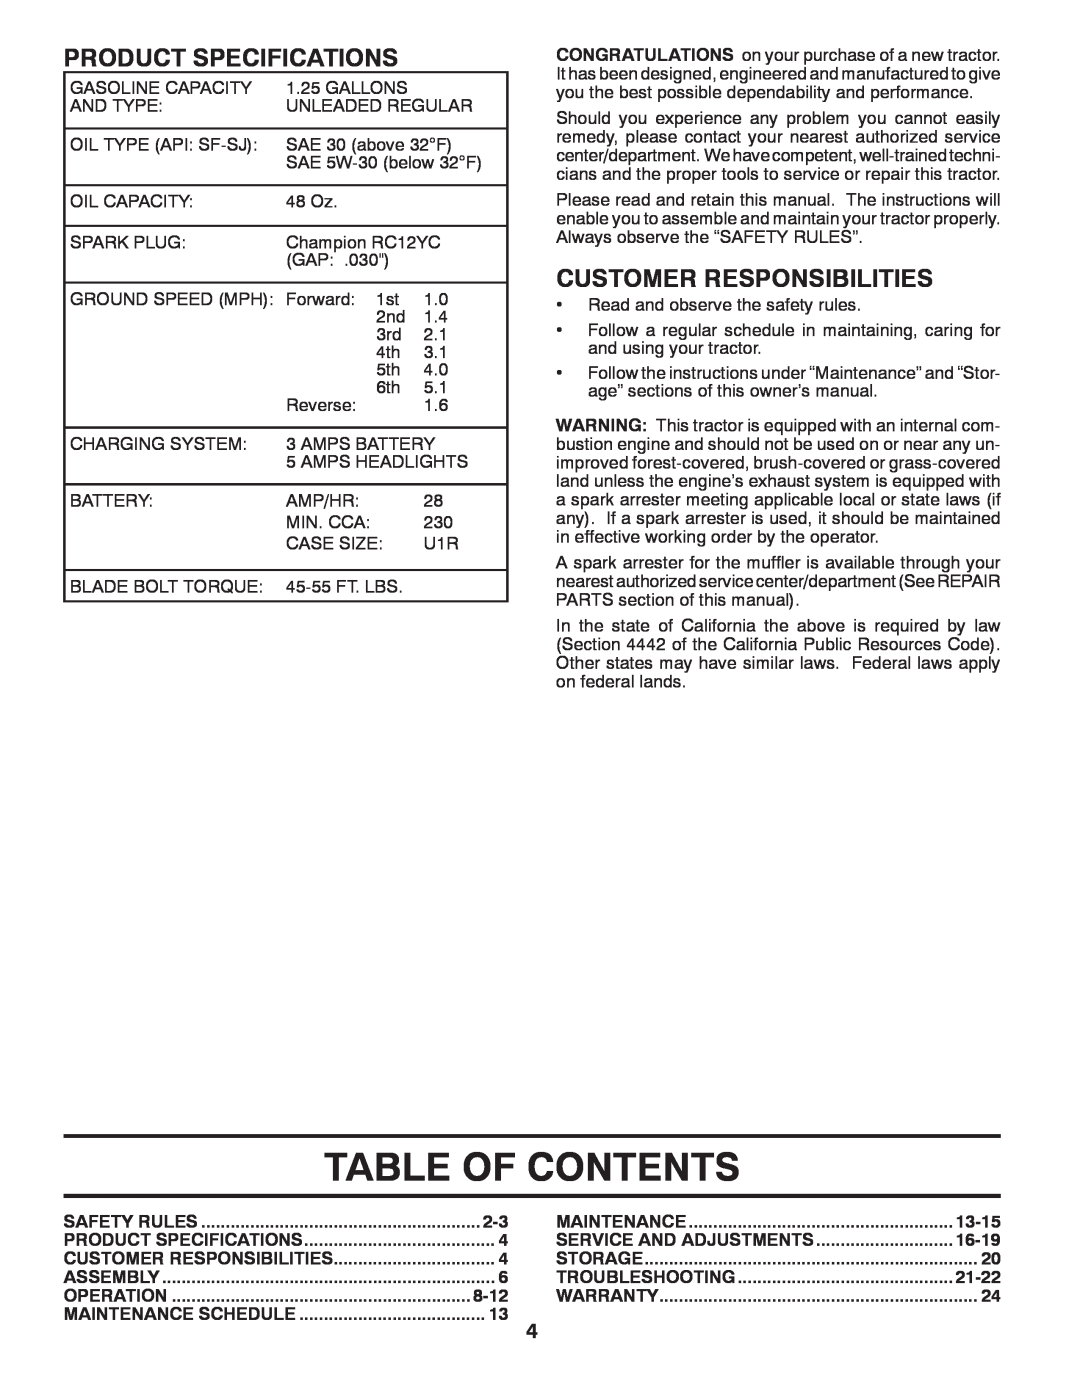 Poulan 424634 manual Table Of Contents, Product Specifications, Customer Responsibilities 